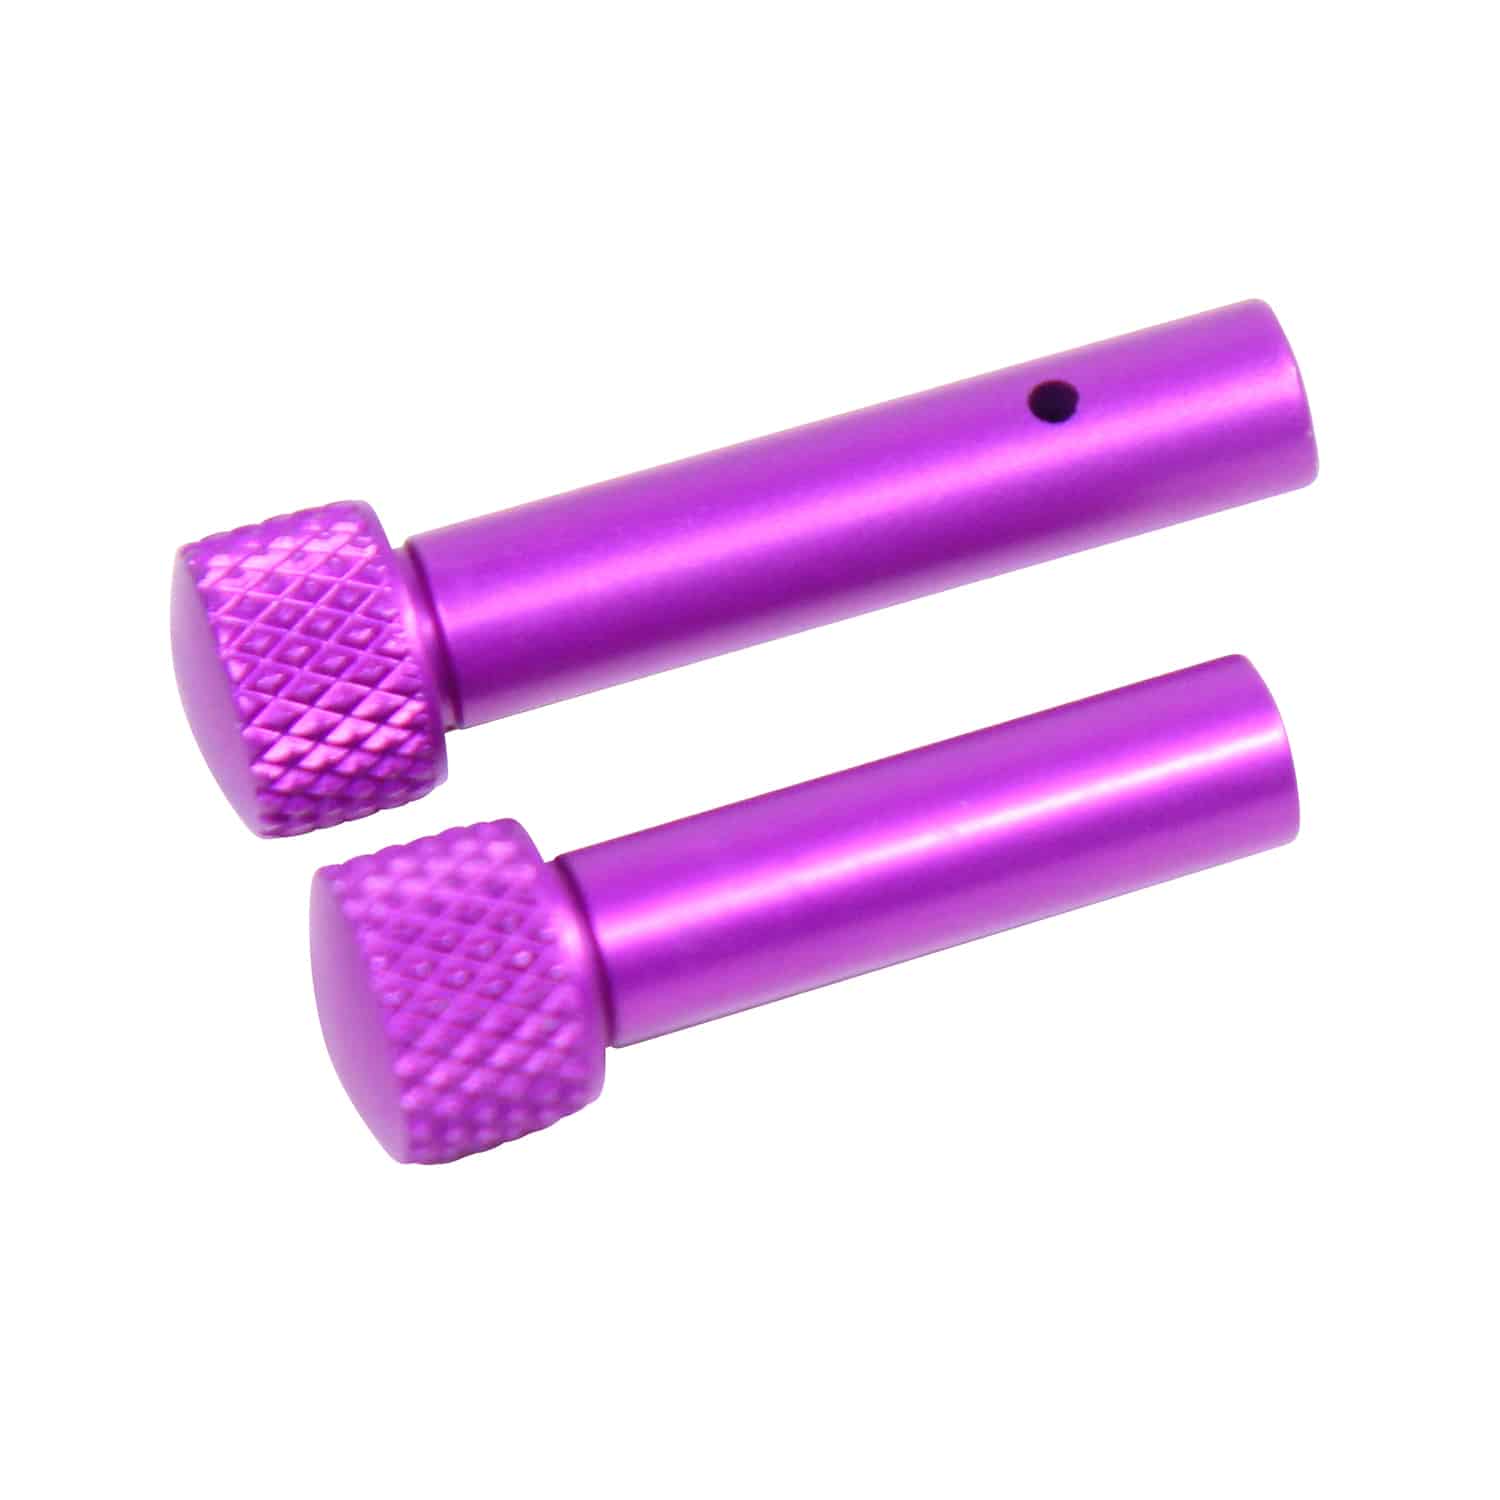 AR-15 5.56 Cal Extended Takedown Pin Set Gen 2 in Anodized Purple